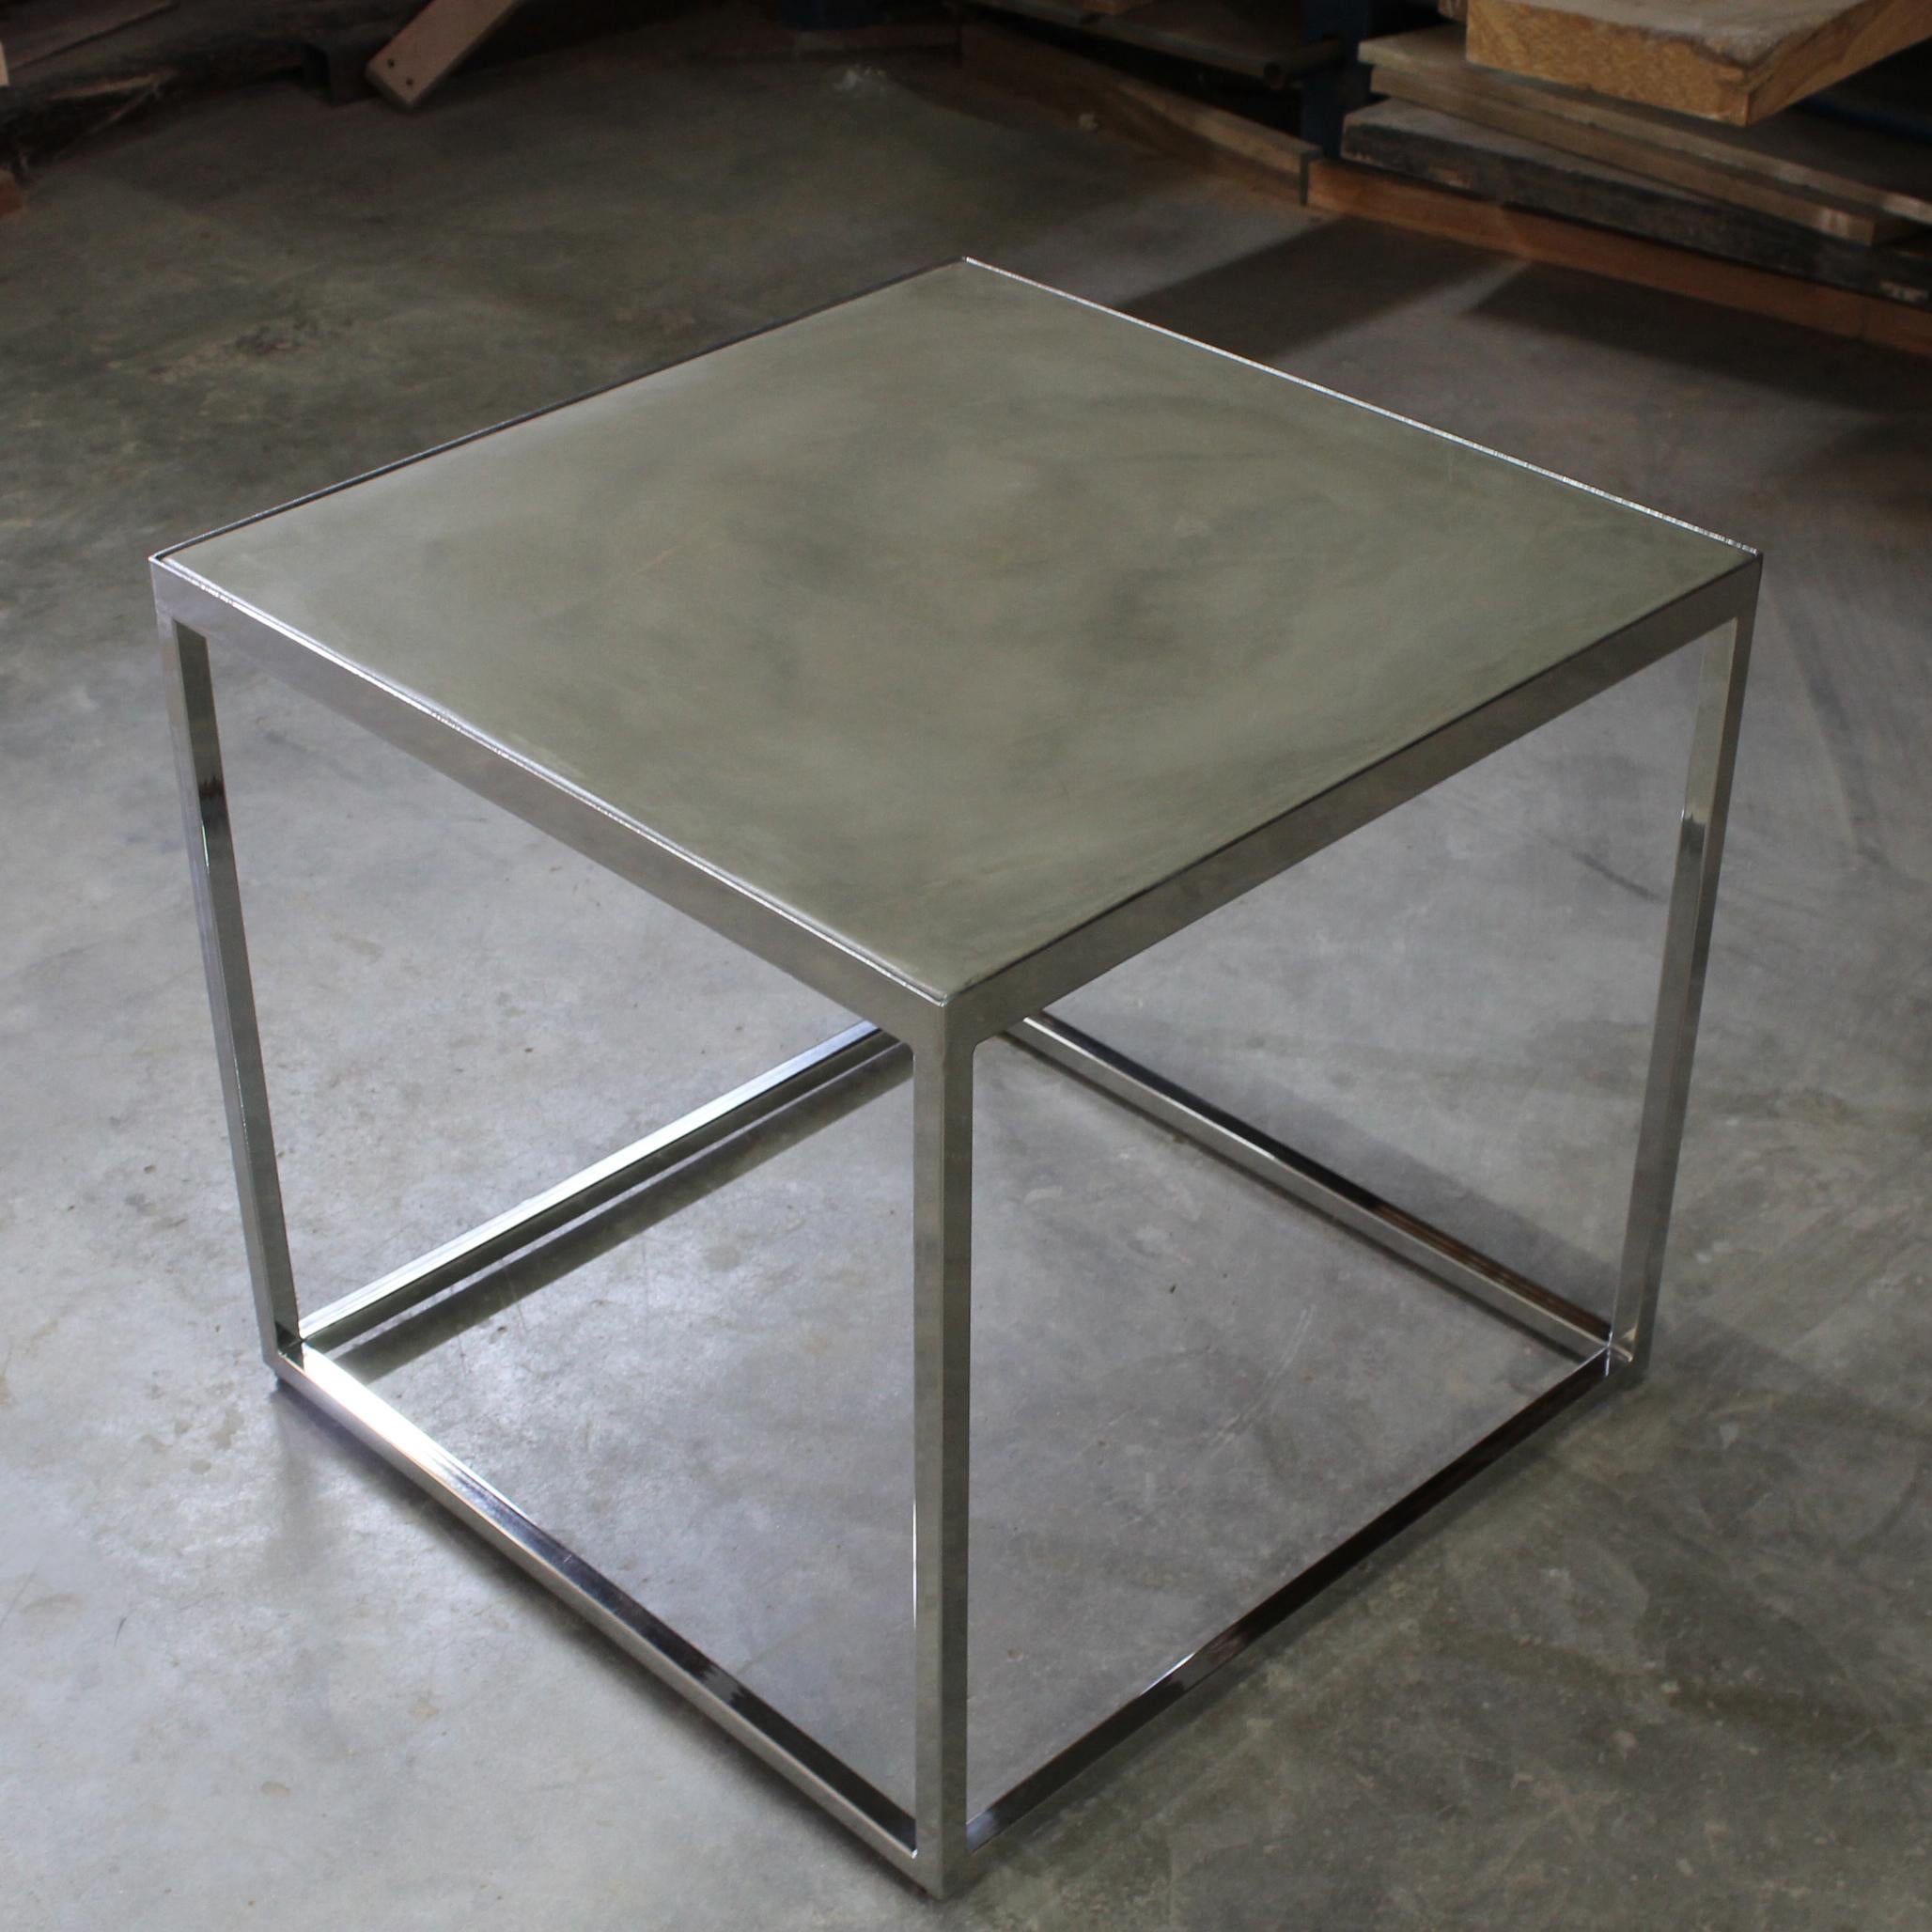 This contemporary design features a rectilinear polished steel frame (customizable) and a polished concrete top, available in any color and other materials as well. Order as shown or in a custom size or finish.

Measurements are: 24